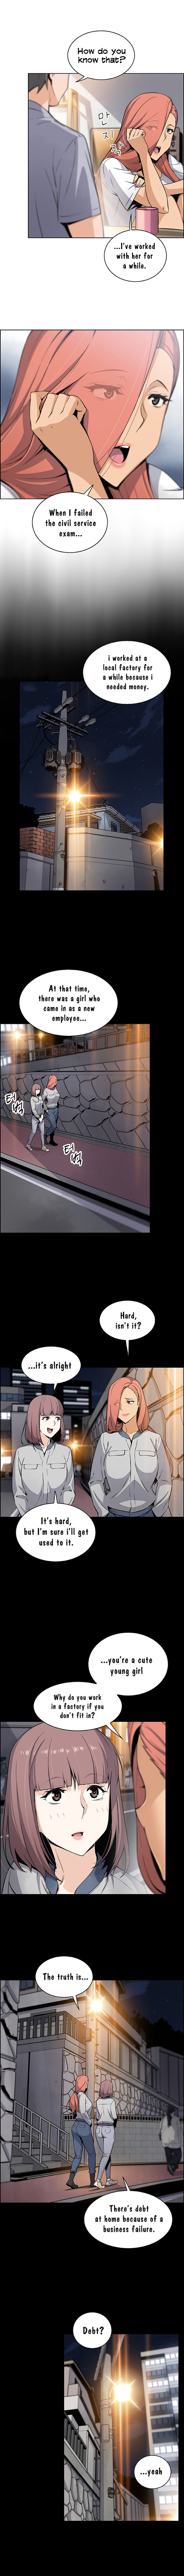 Housekeeper Manhwa - Chapter 40 Page 6